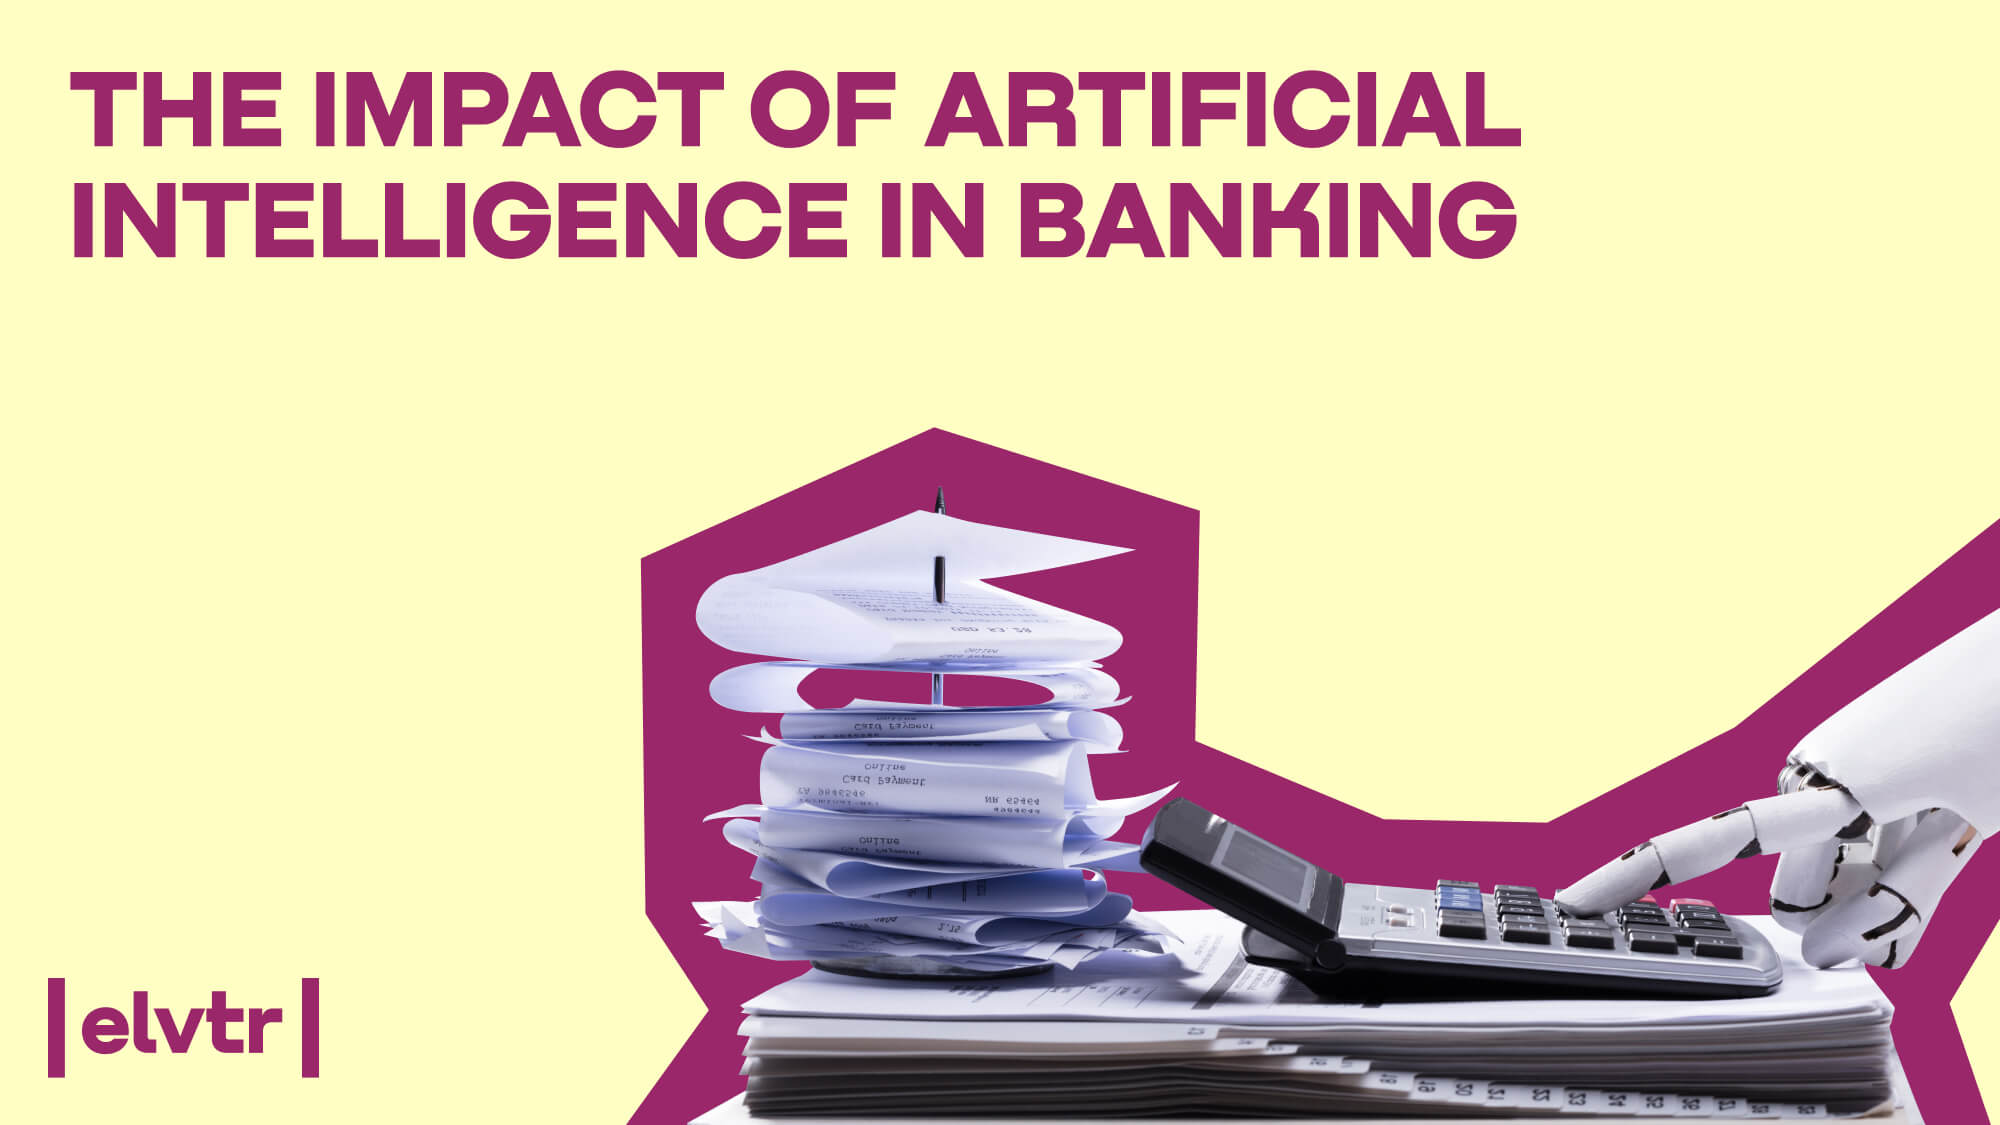 You Can't Afford to Wait on AI: The Impact of Artificial Intelligence in Banking image